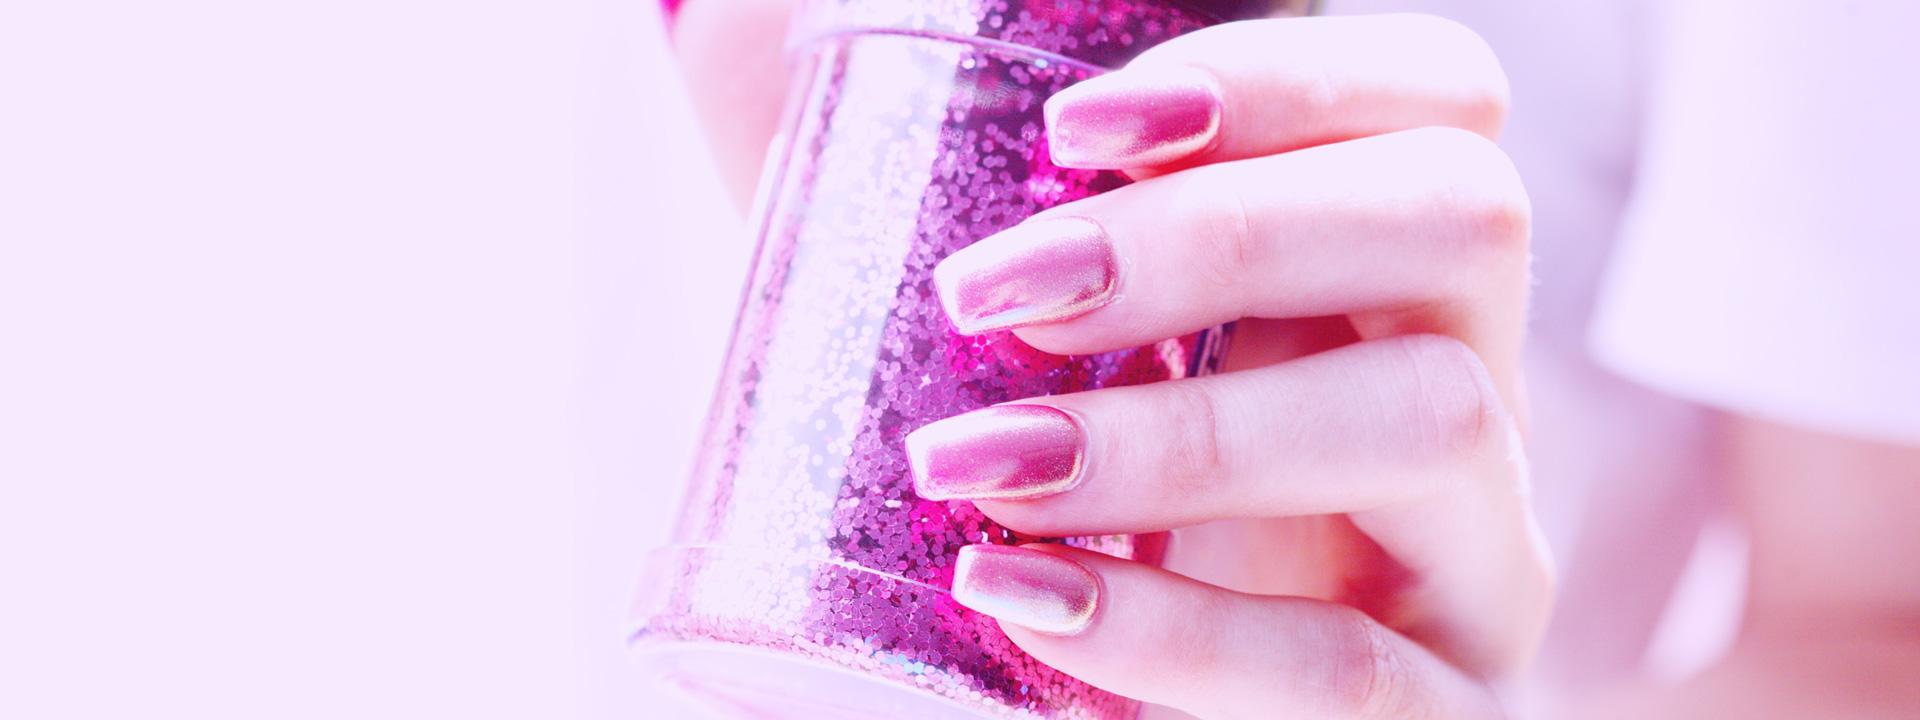 Nail Art courses from home [Art Workshops]